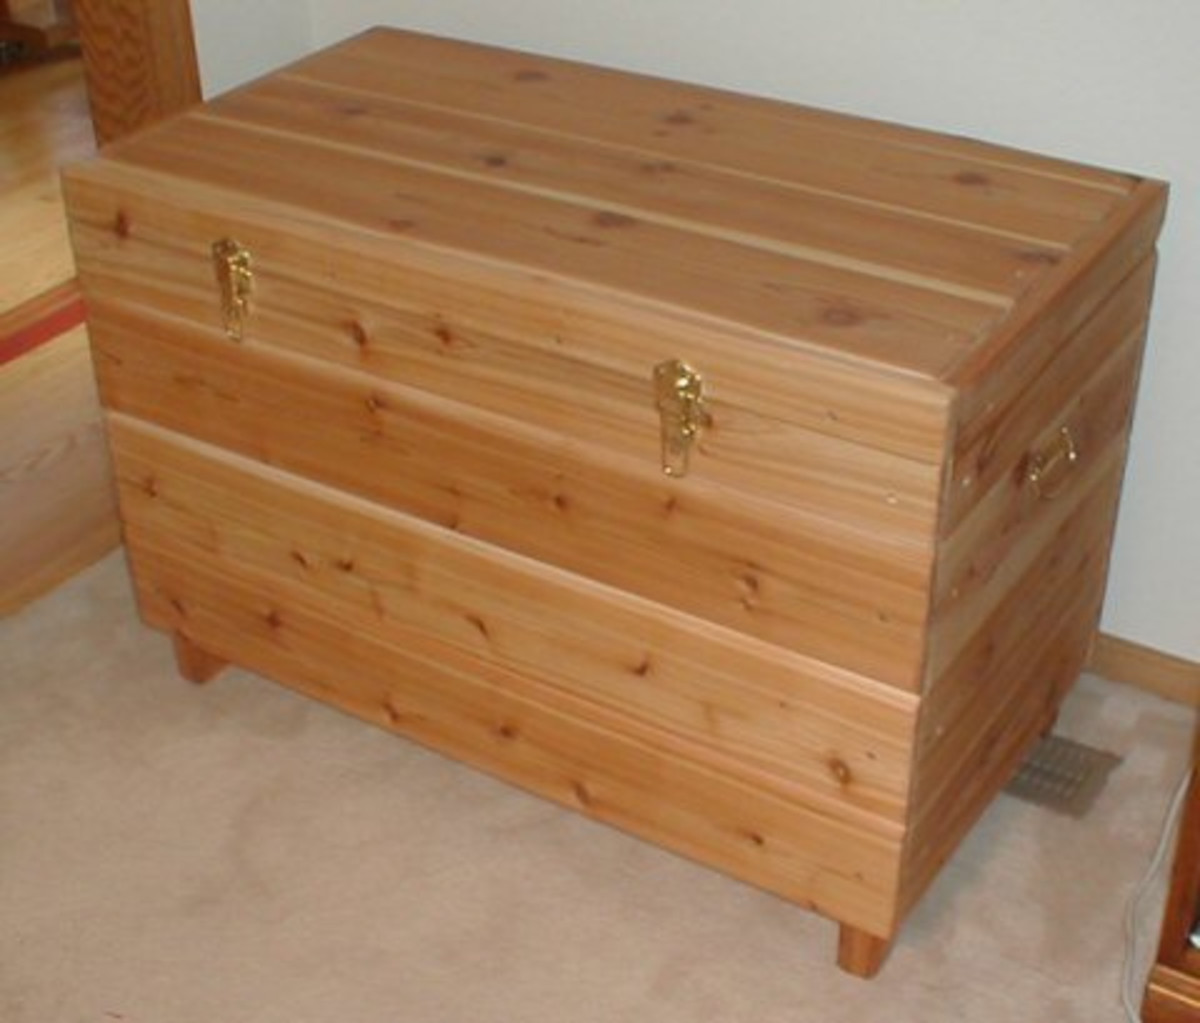 Modern hope chest that boys would appreciate too!